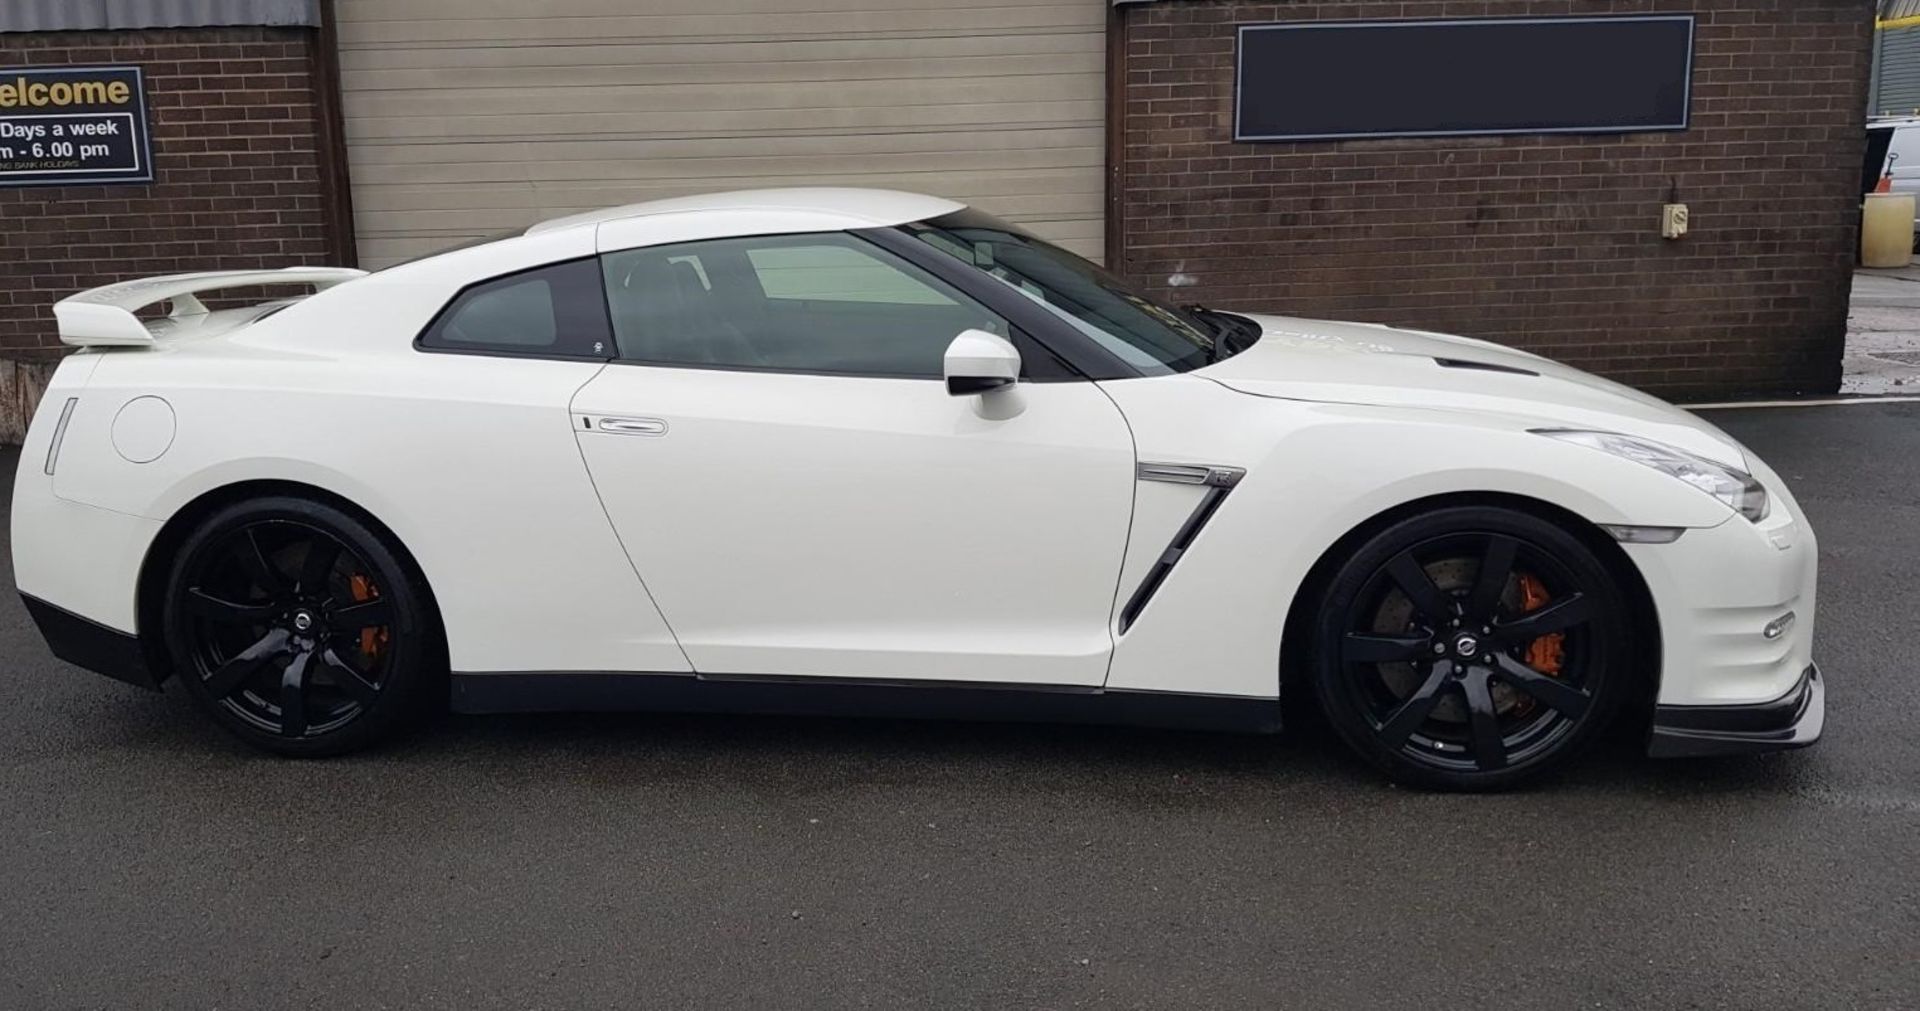 2011 NISSAN GT-R R35 750 stage 5 PREMIUM EDITION S-A 1 OWNER FROM NEW 19.5K MILES WARRANTED! no vat - Image 7 of 7